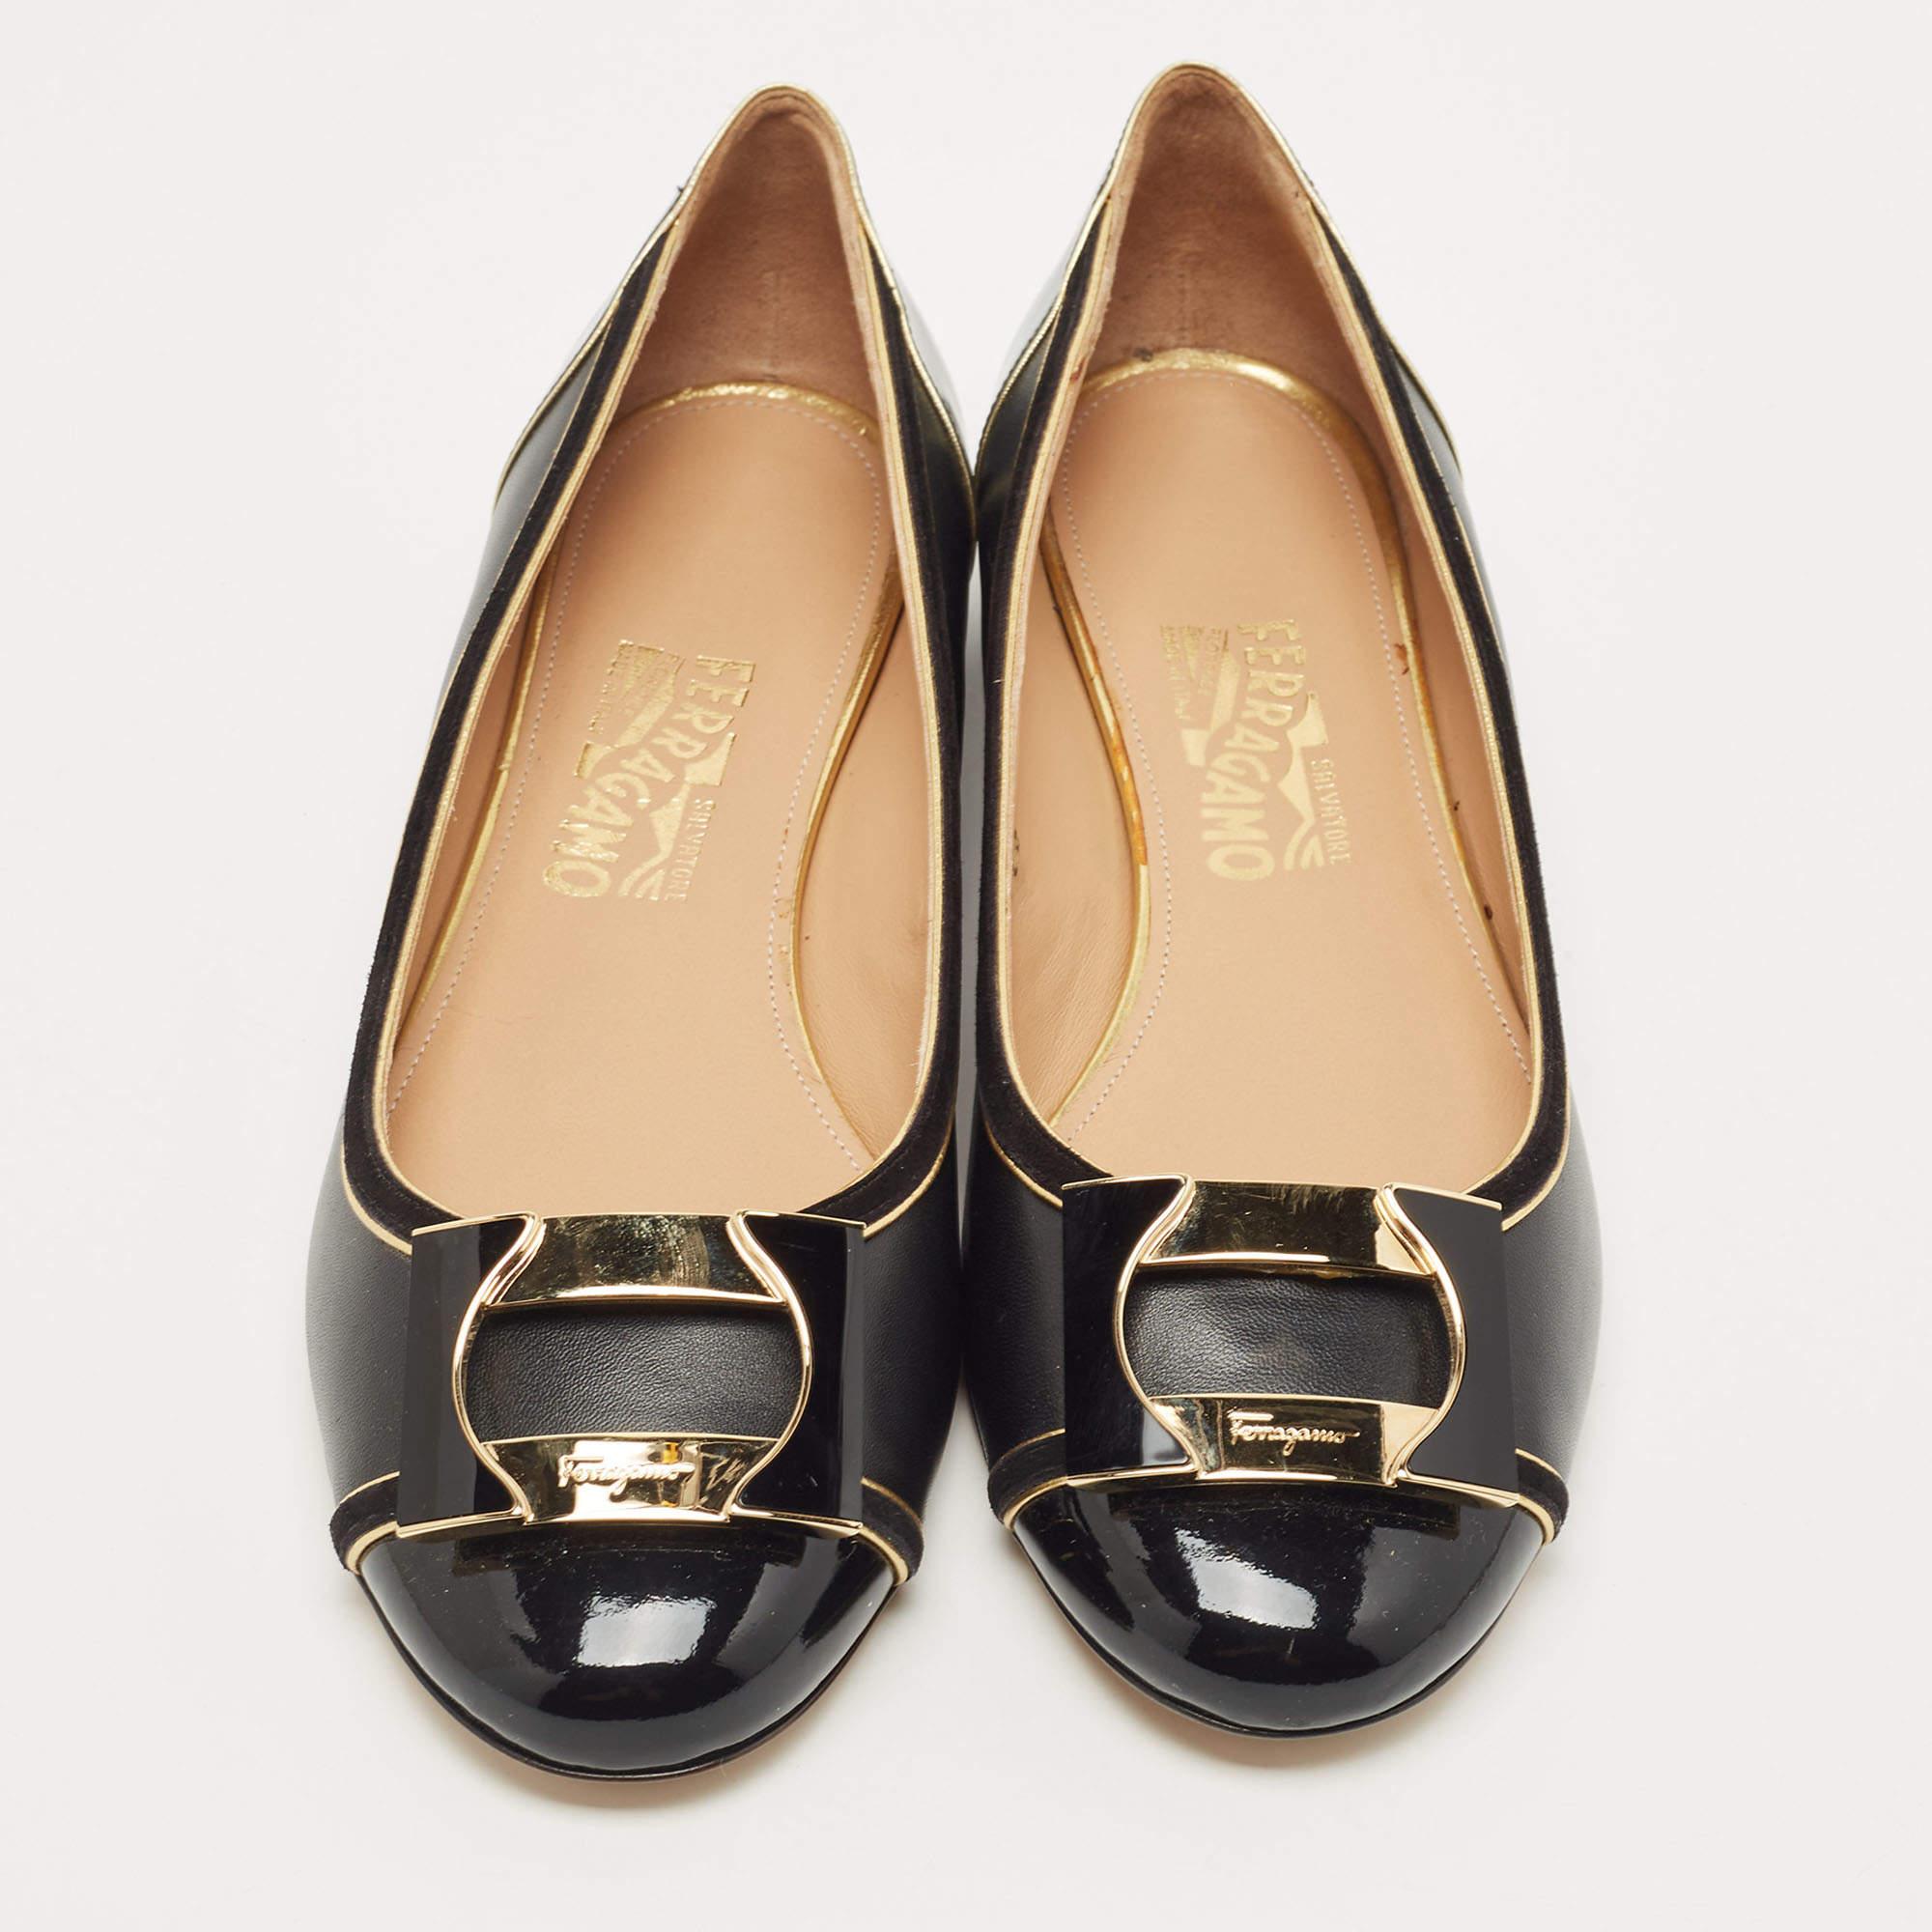 Complete your look by adding these Salvatore Ferragamo ballet flats to your lovely wardrobe. They are crafted skilfully to grant the perfect fit and style.

Includes: Original Box, Original Dustbag

